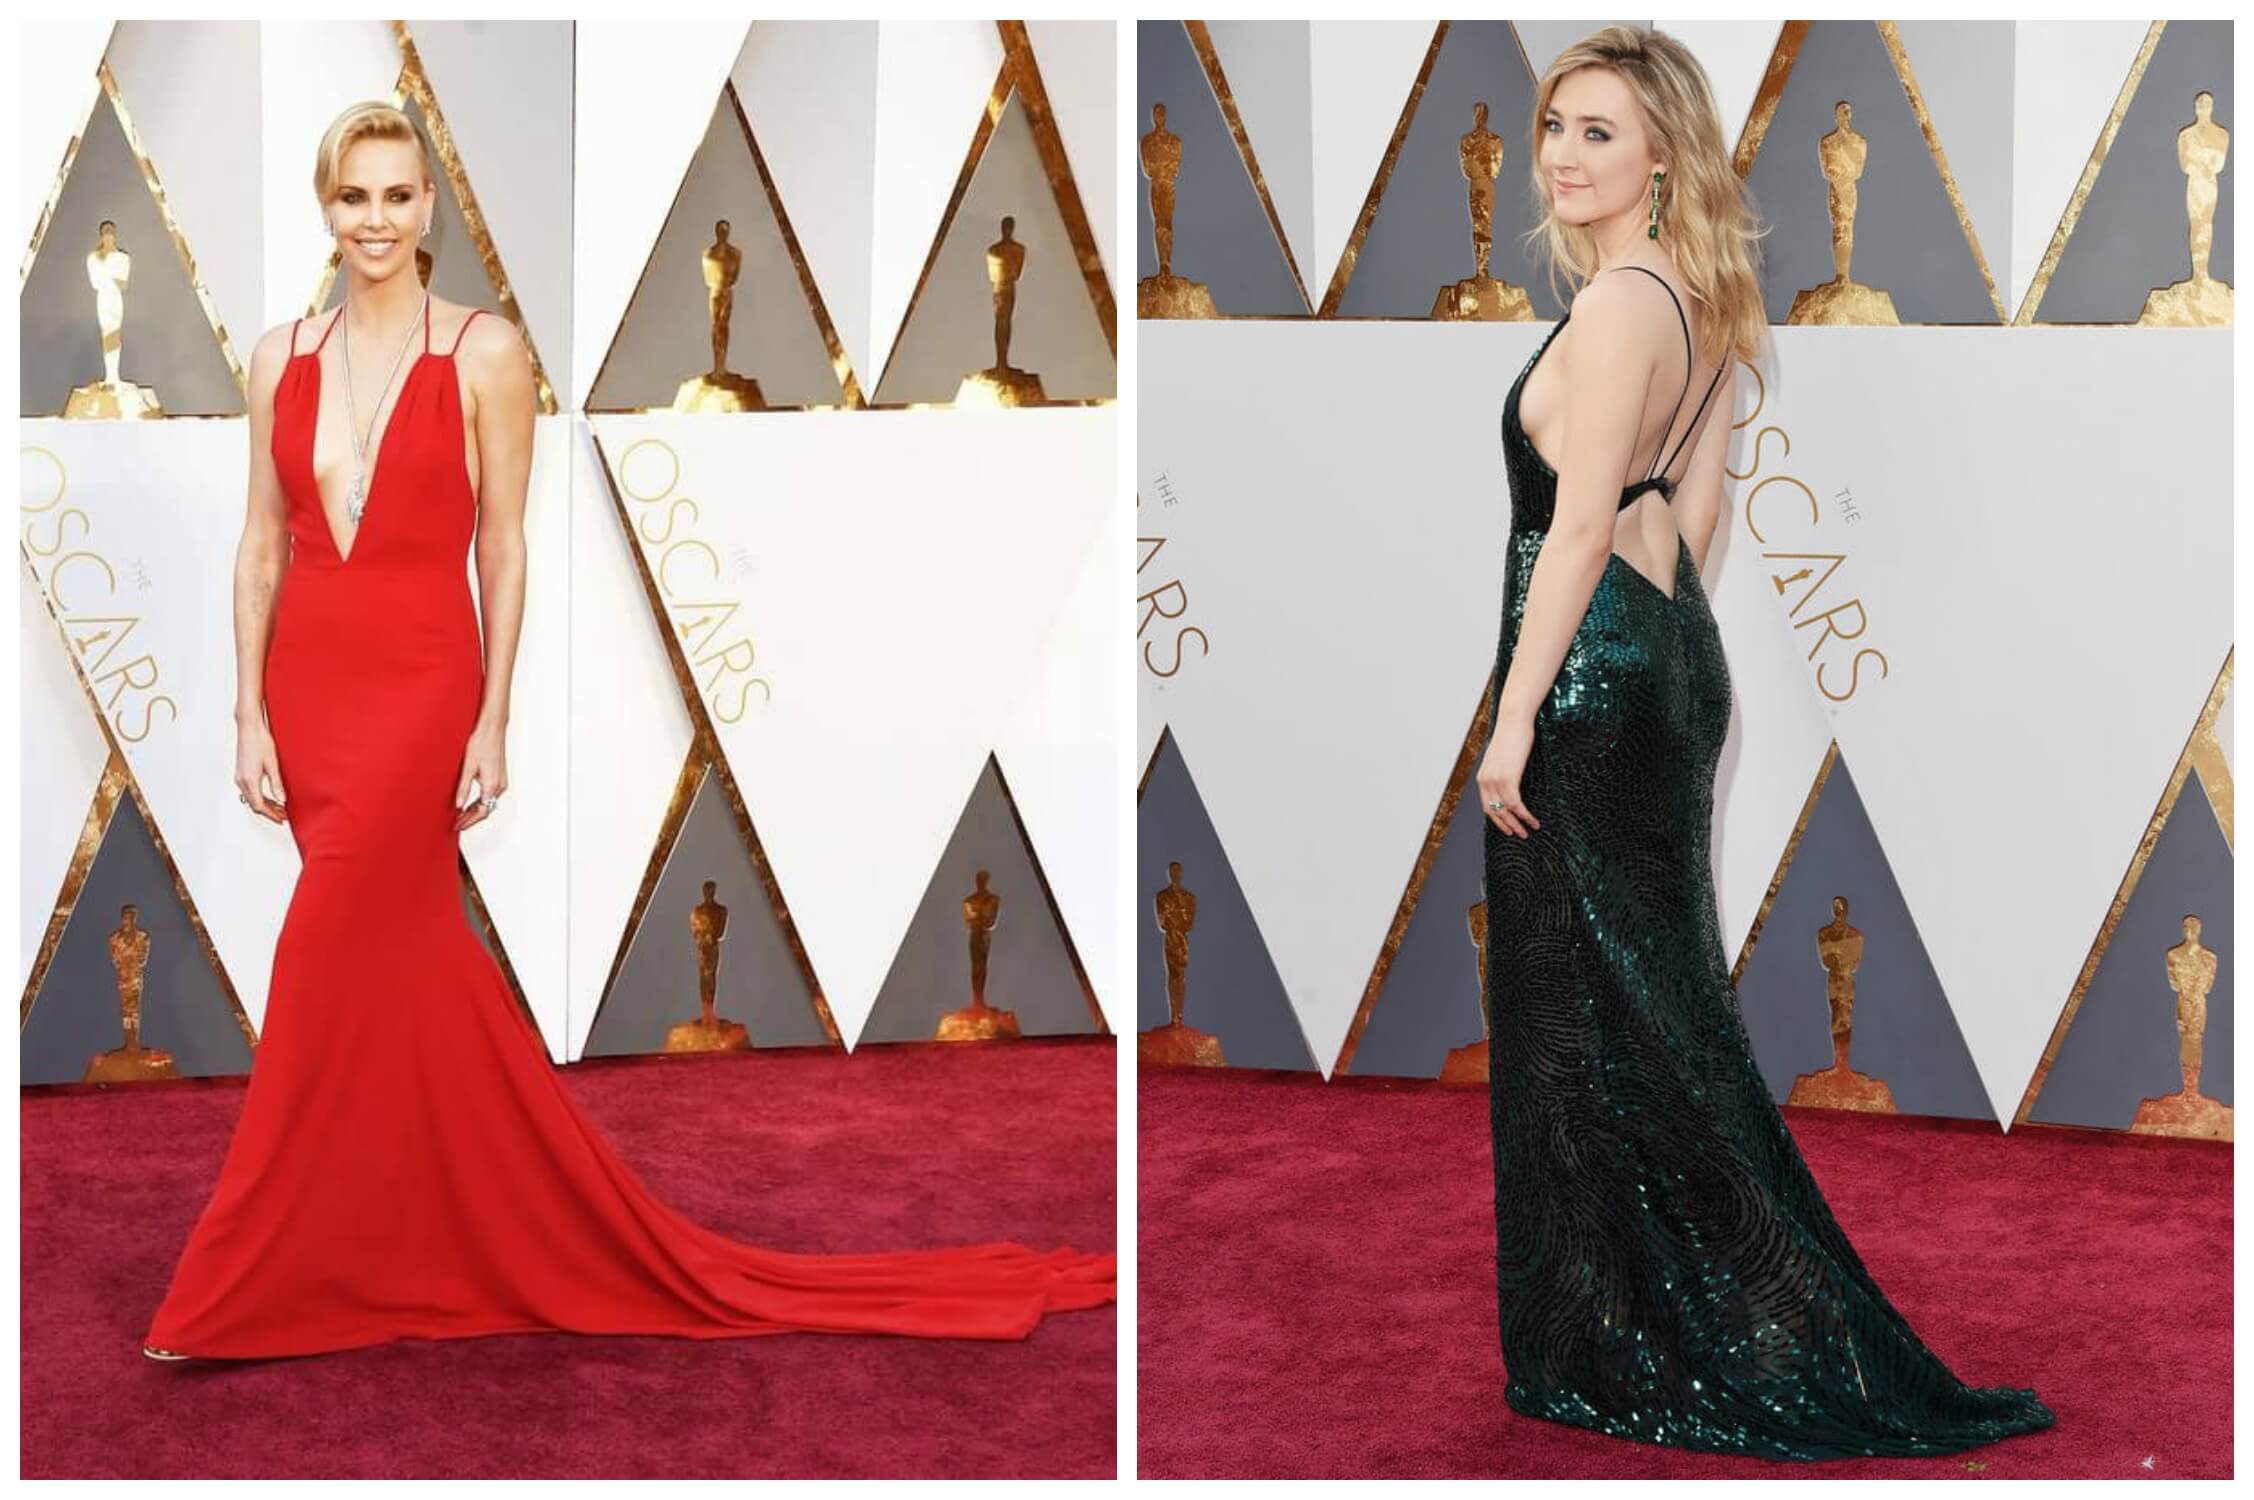 Charlize Theron at the 2016 Oscars in Dior Haute Couture with shoulder cutouts via US Magazine; Saoirse Ronan at the 2016 Oscars in Calvin Klein with a back cutout via PopSugar